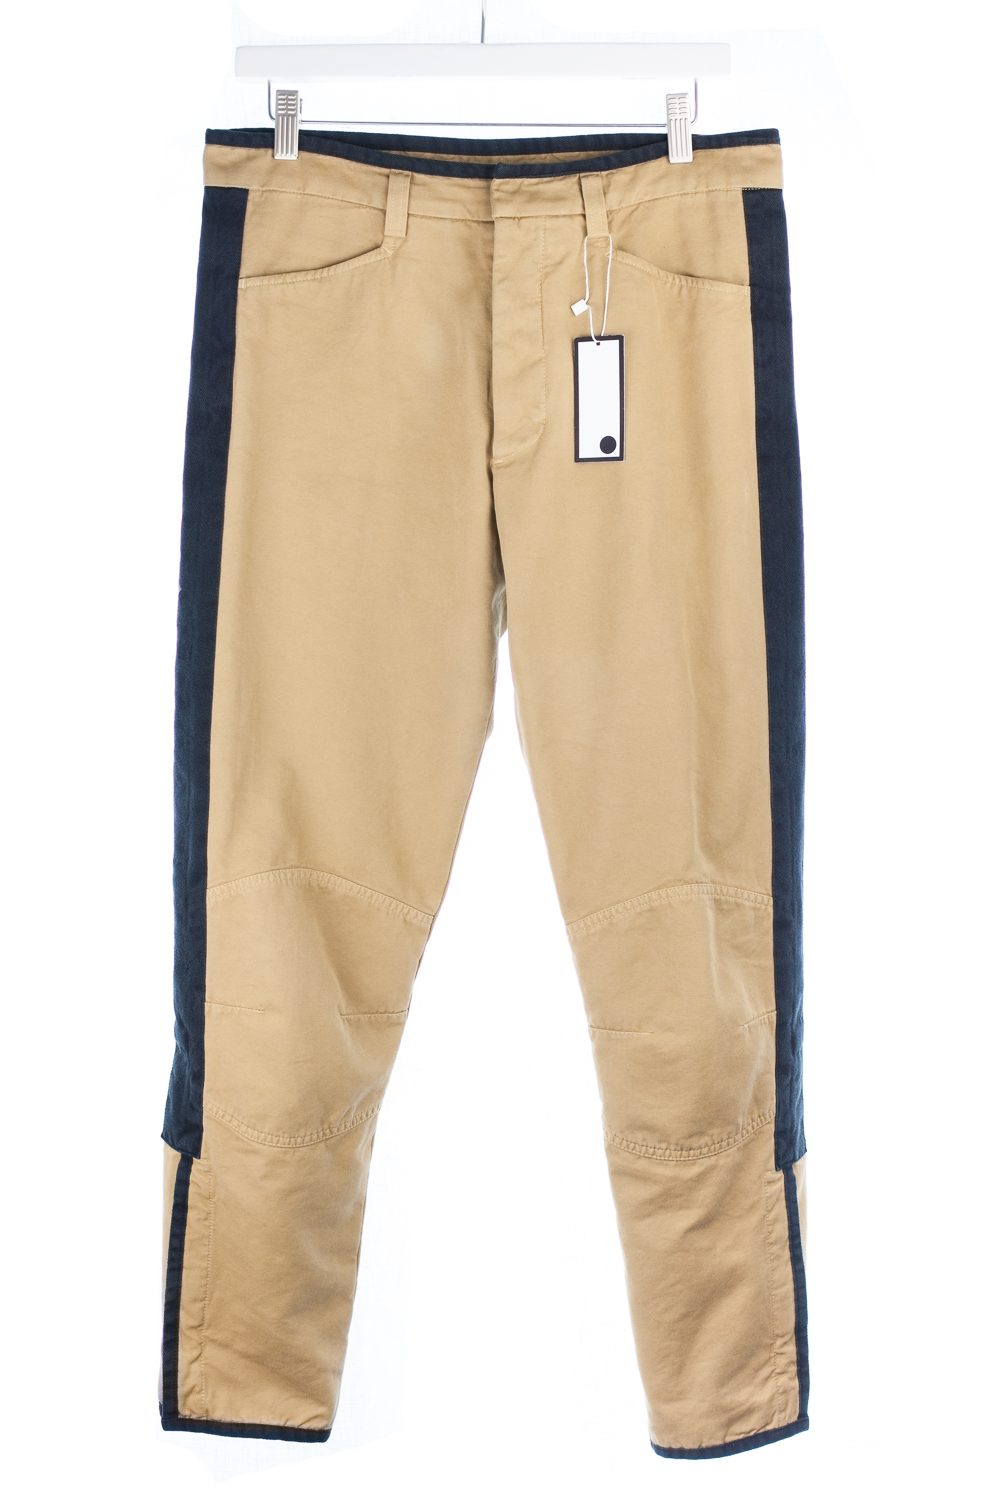 FW15 Cropped Military Pants w/ Trimming